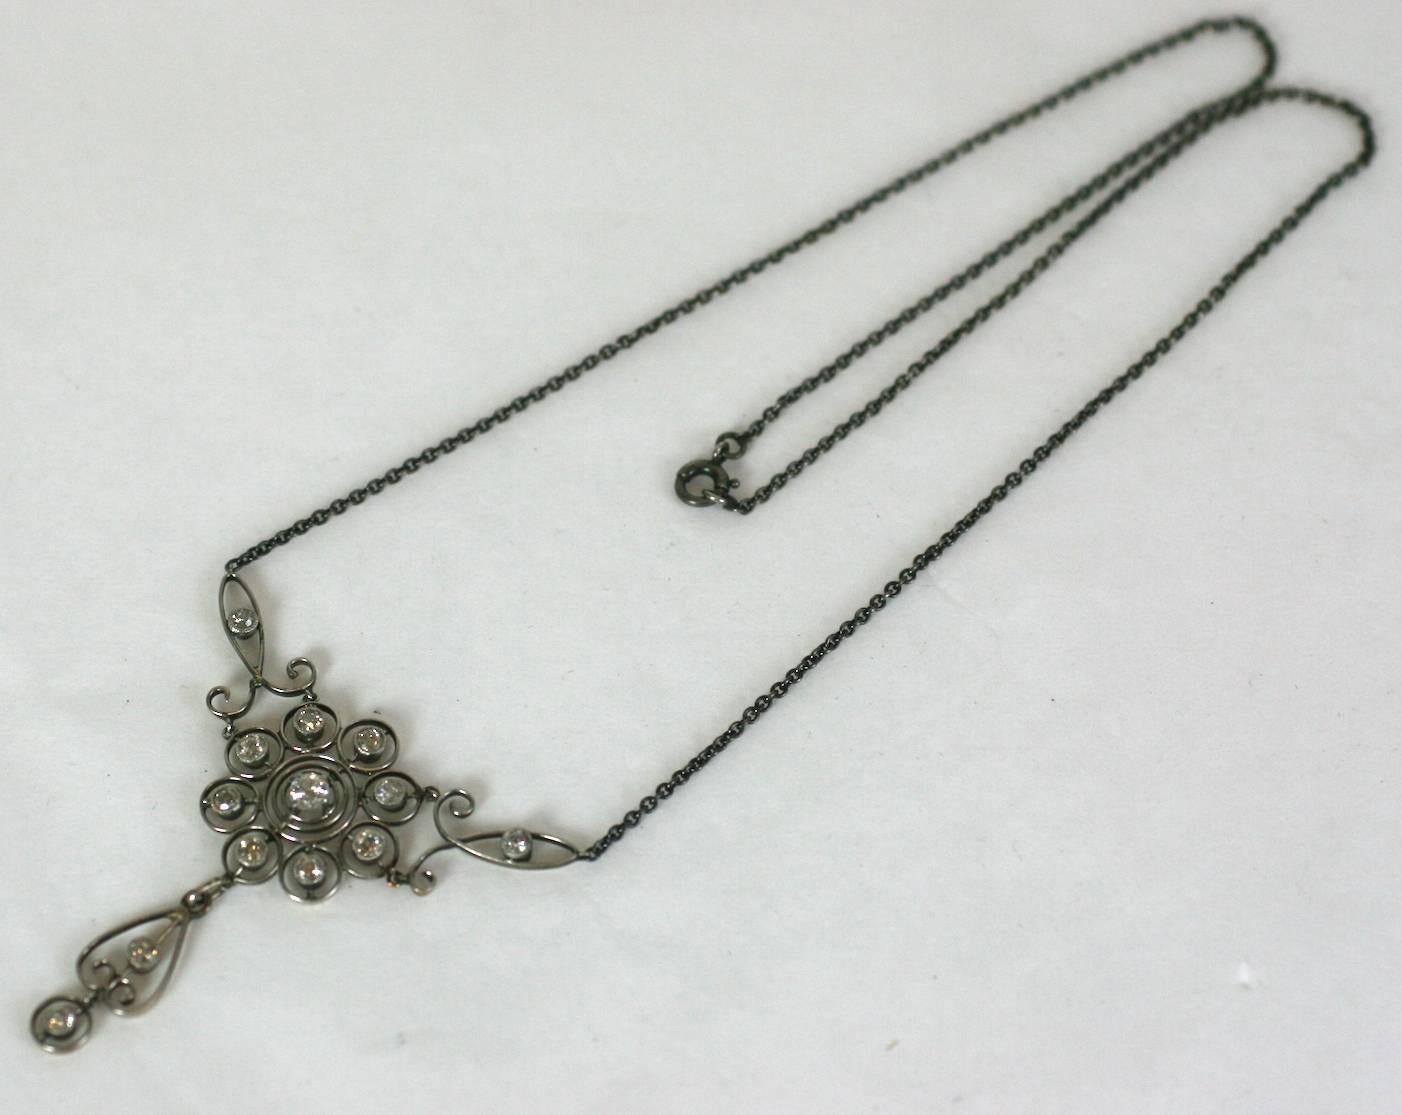 Edwardian Diamond Pendant necklace circa 1900. Openwork settings are made of platinum topped 14k gold set with 13 fine quality, antique cut diamonds. The smaller stones are bezel set in mille grain settings while the center stone is prong set. The